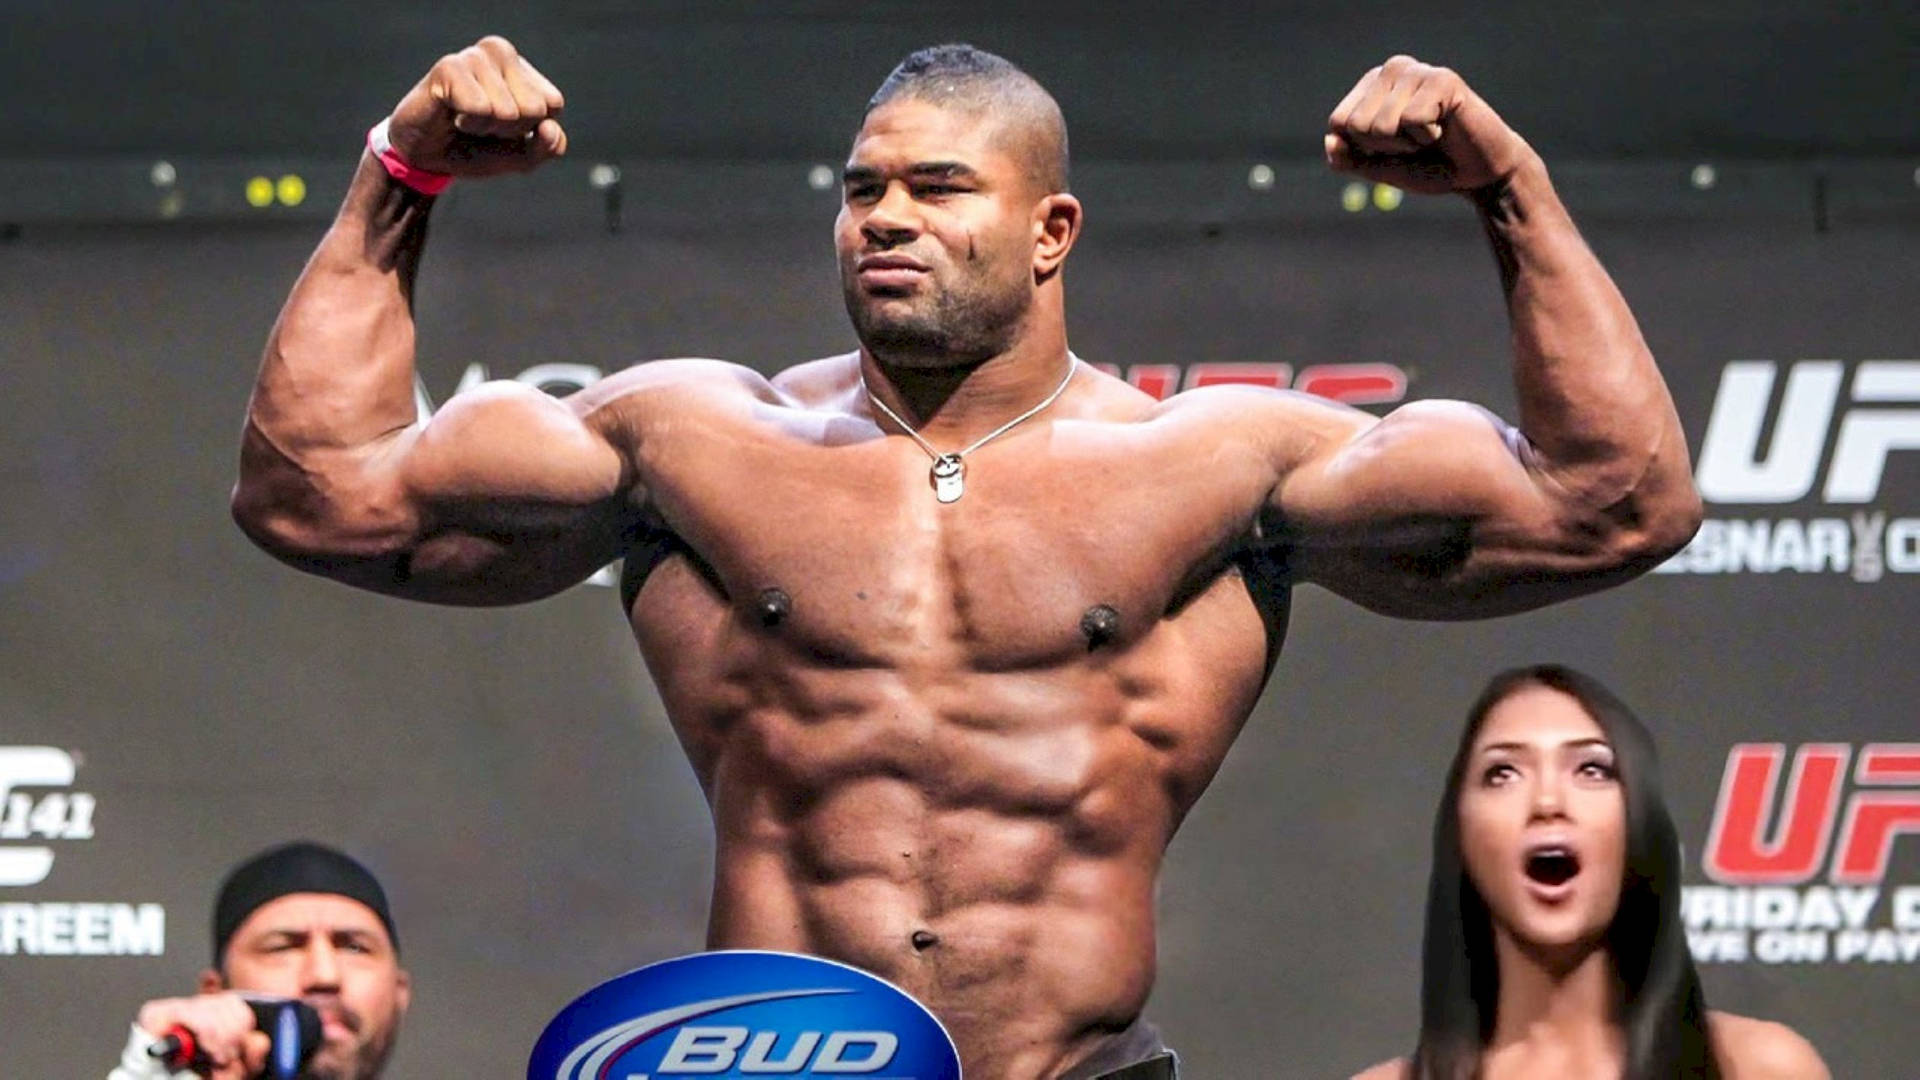 Alistair Overeem, showing off his biceps with a powerful flex. Wallpaper